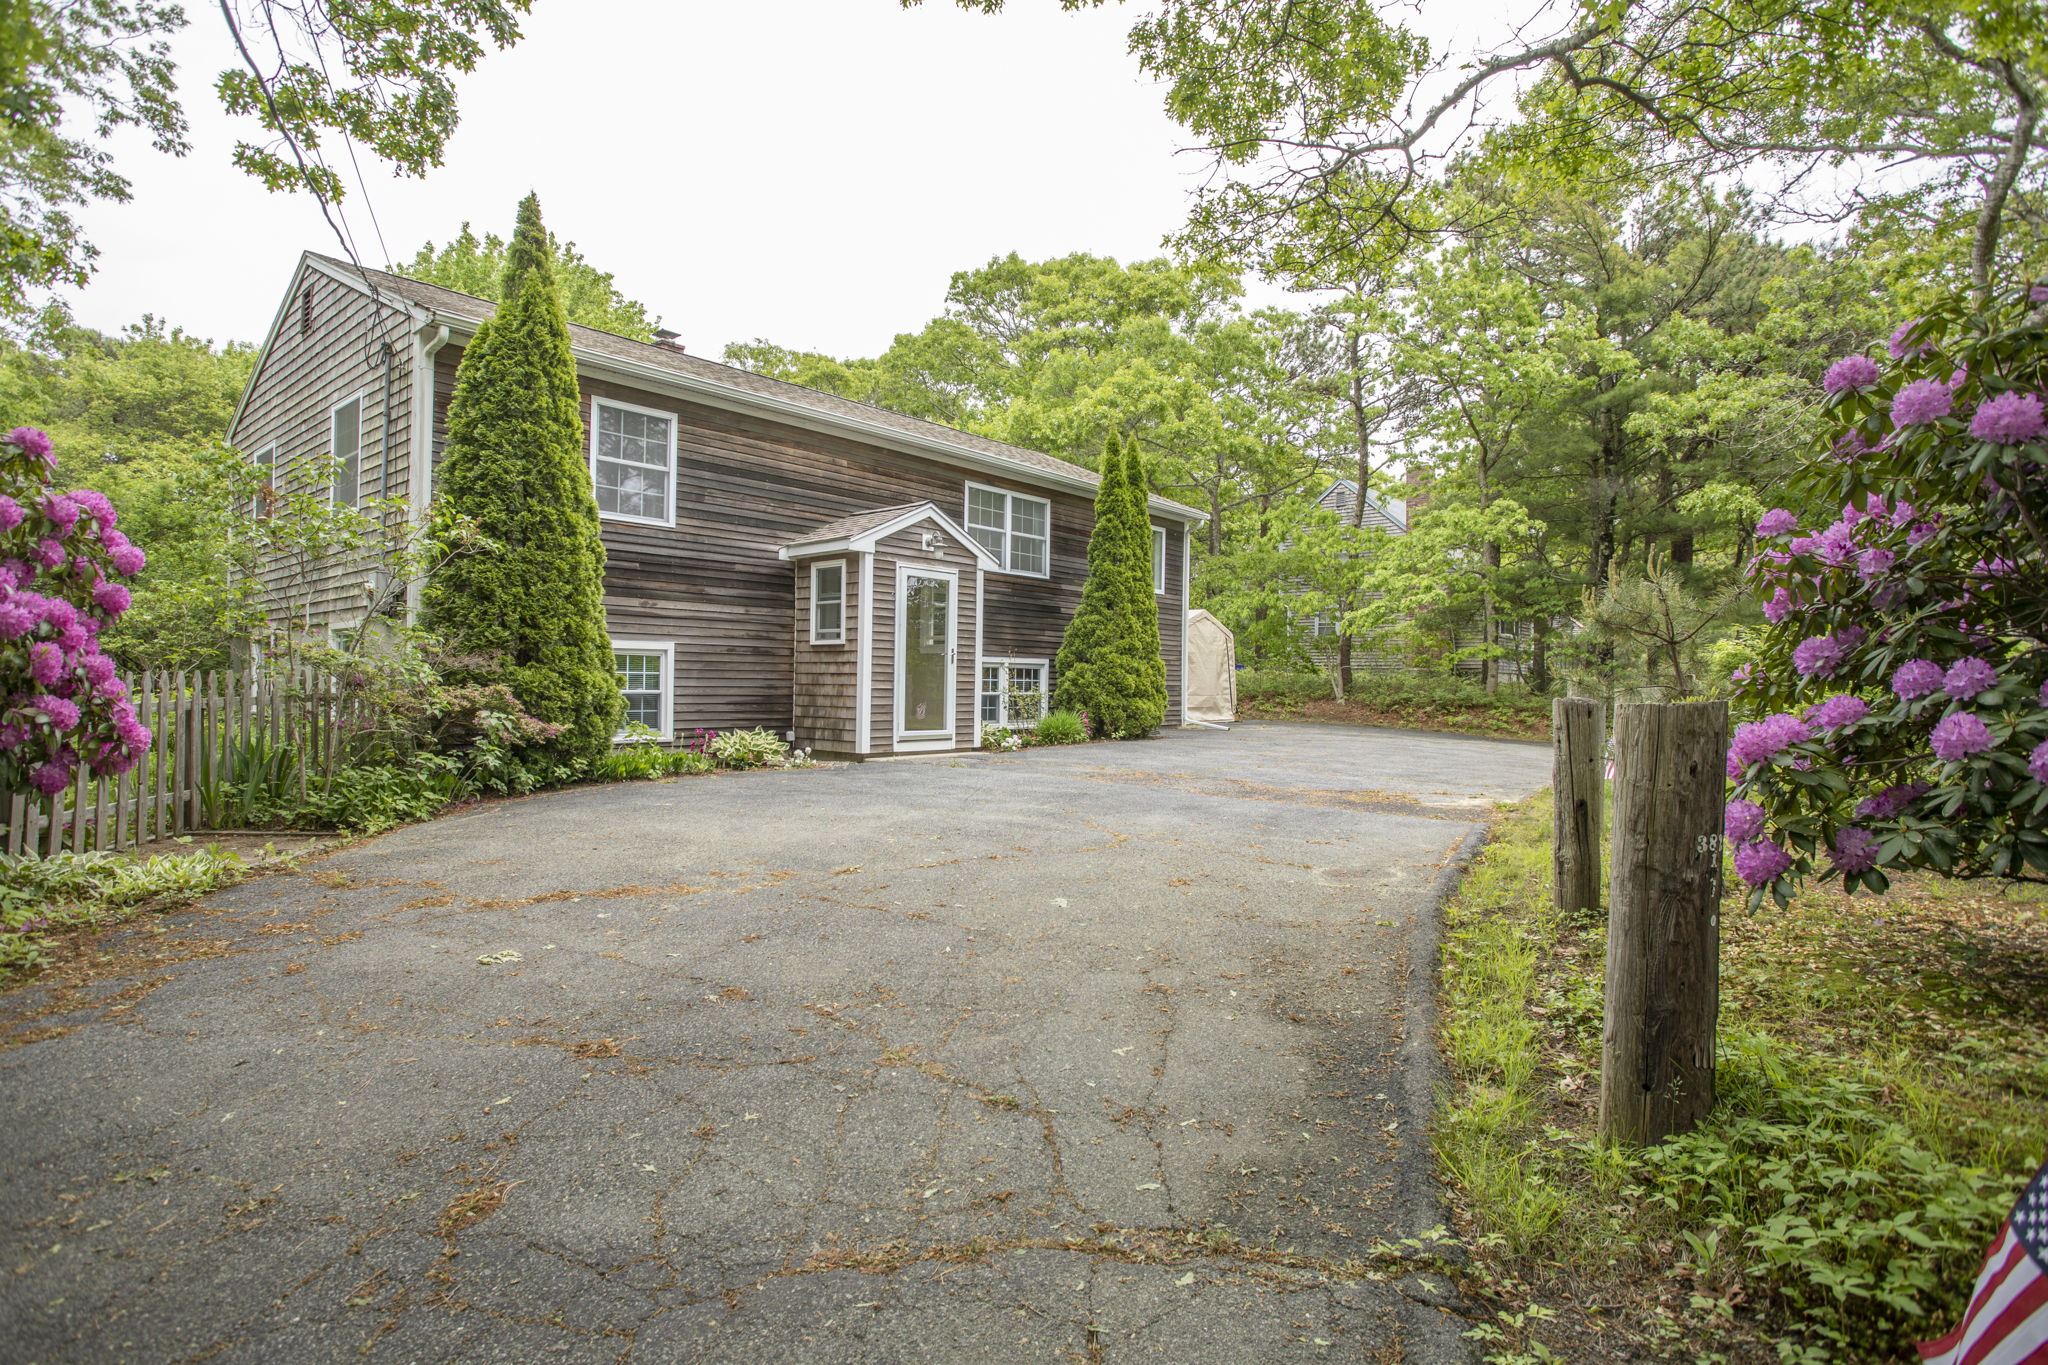  374 Old Plymouth Rd, Bourne, MA 02562, US